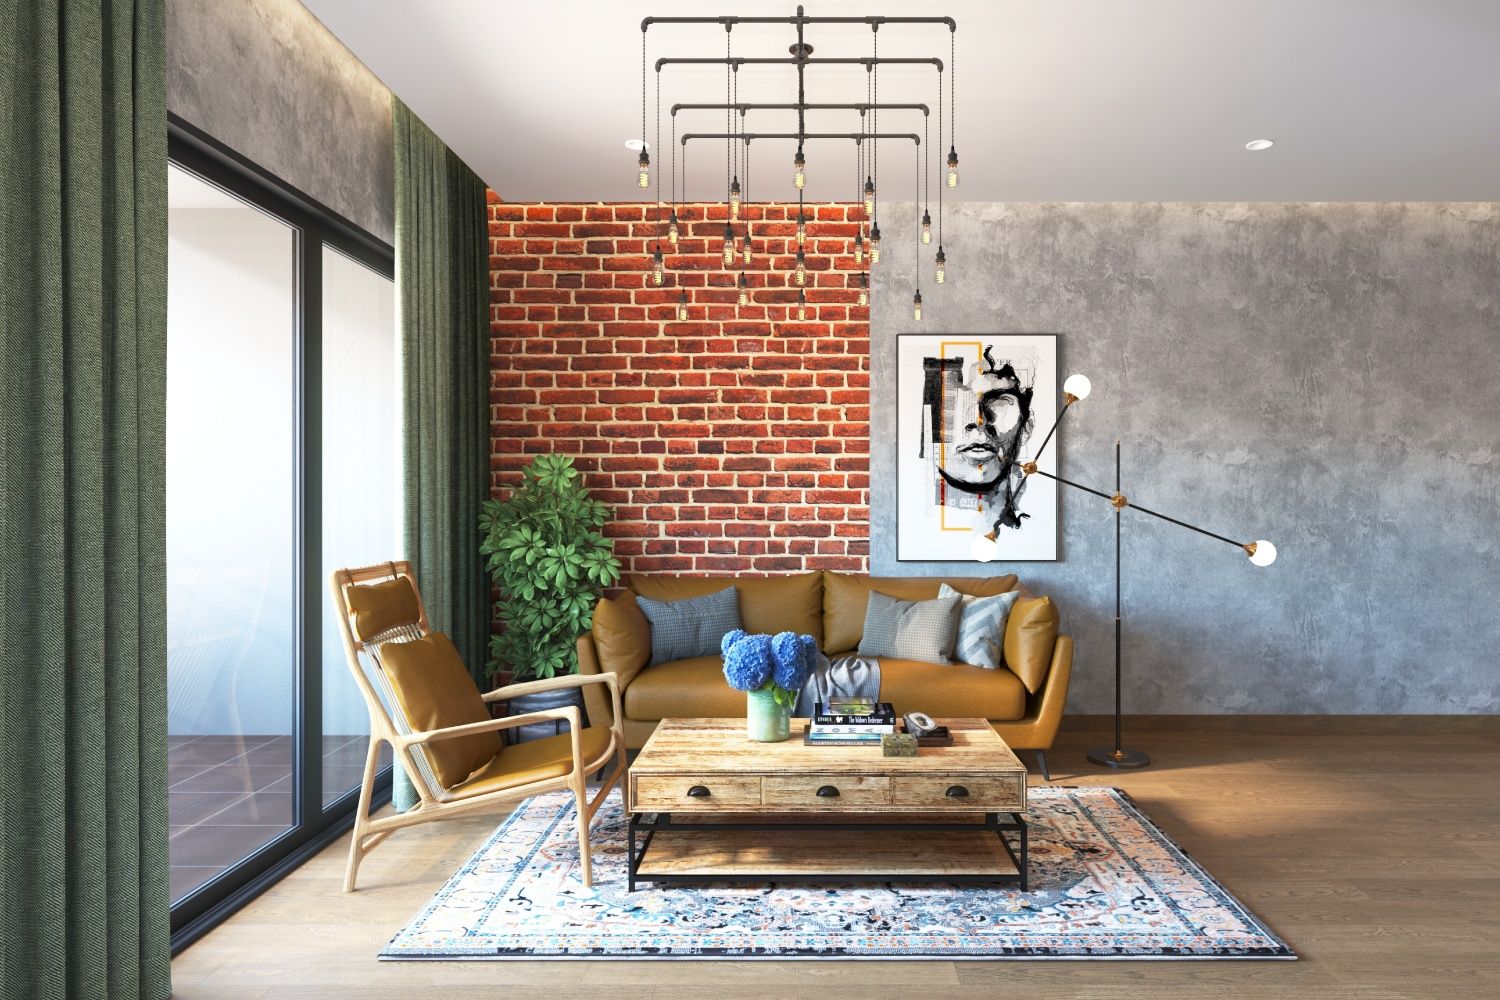 Contemporary Living Room Design With Red Brick Wall